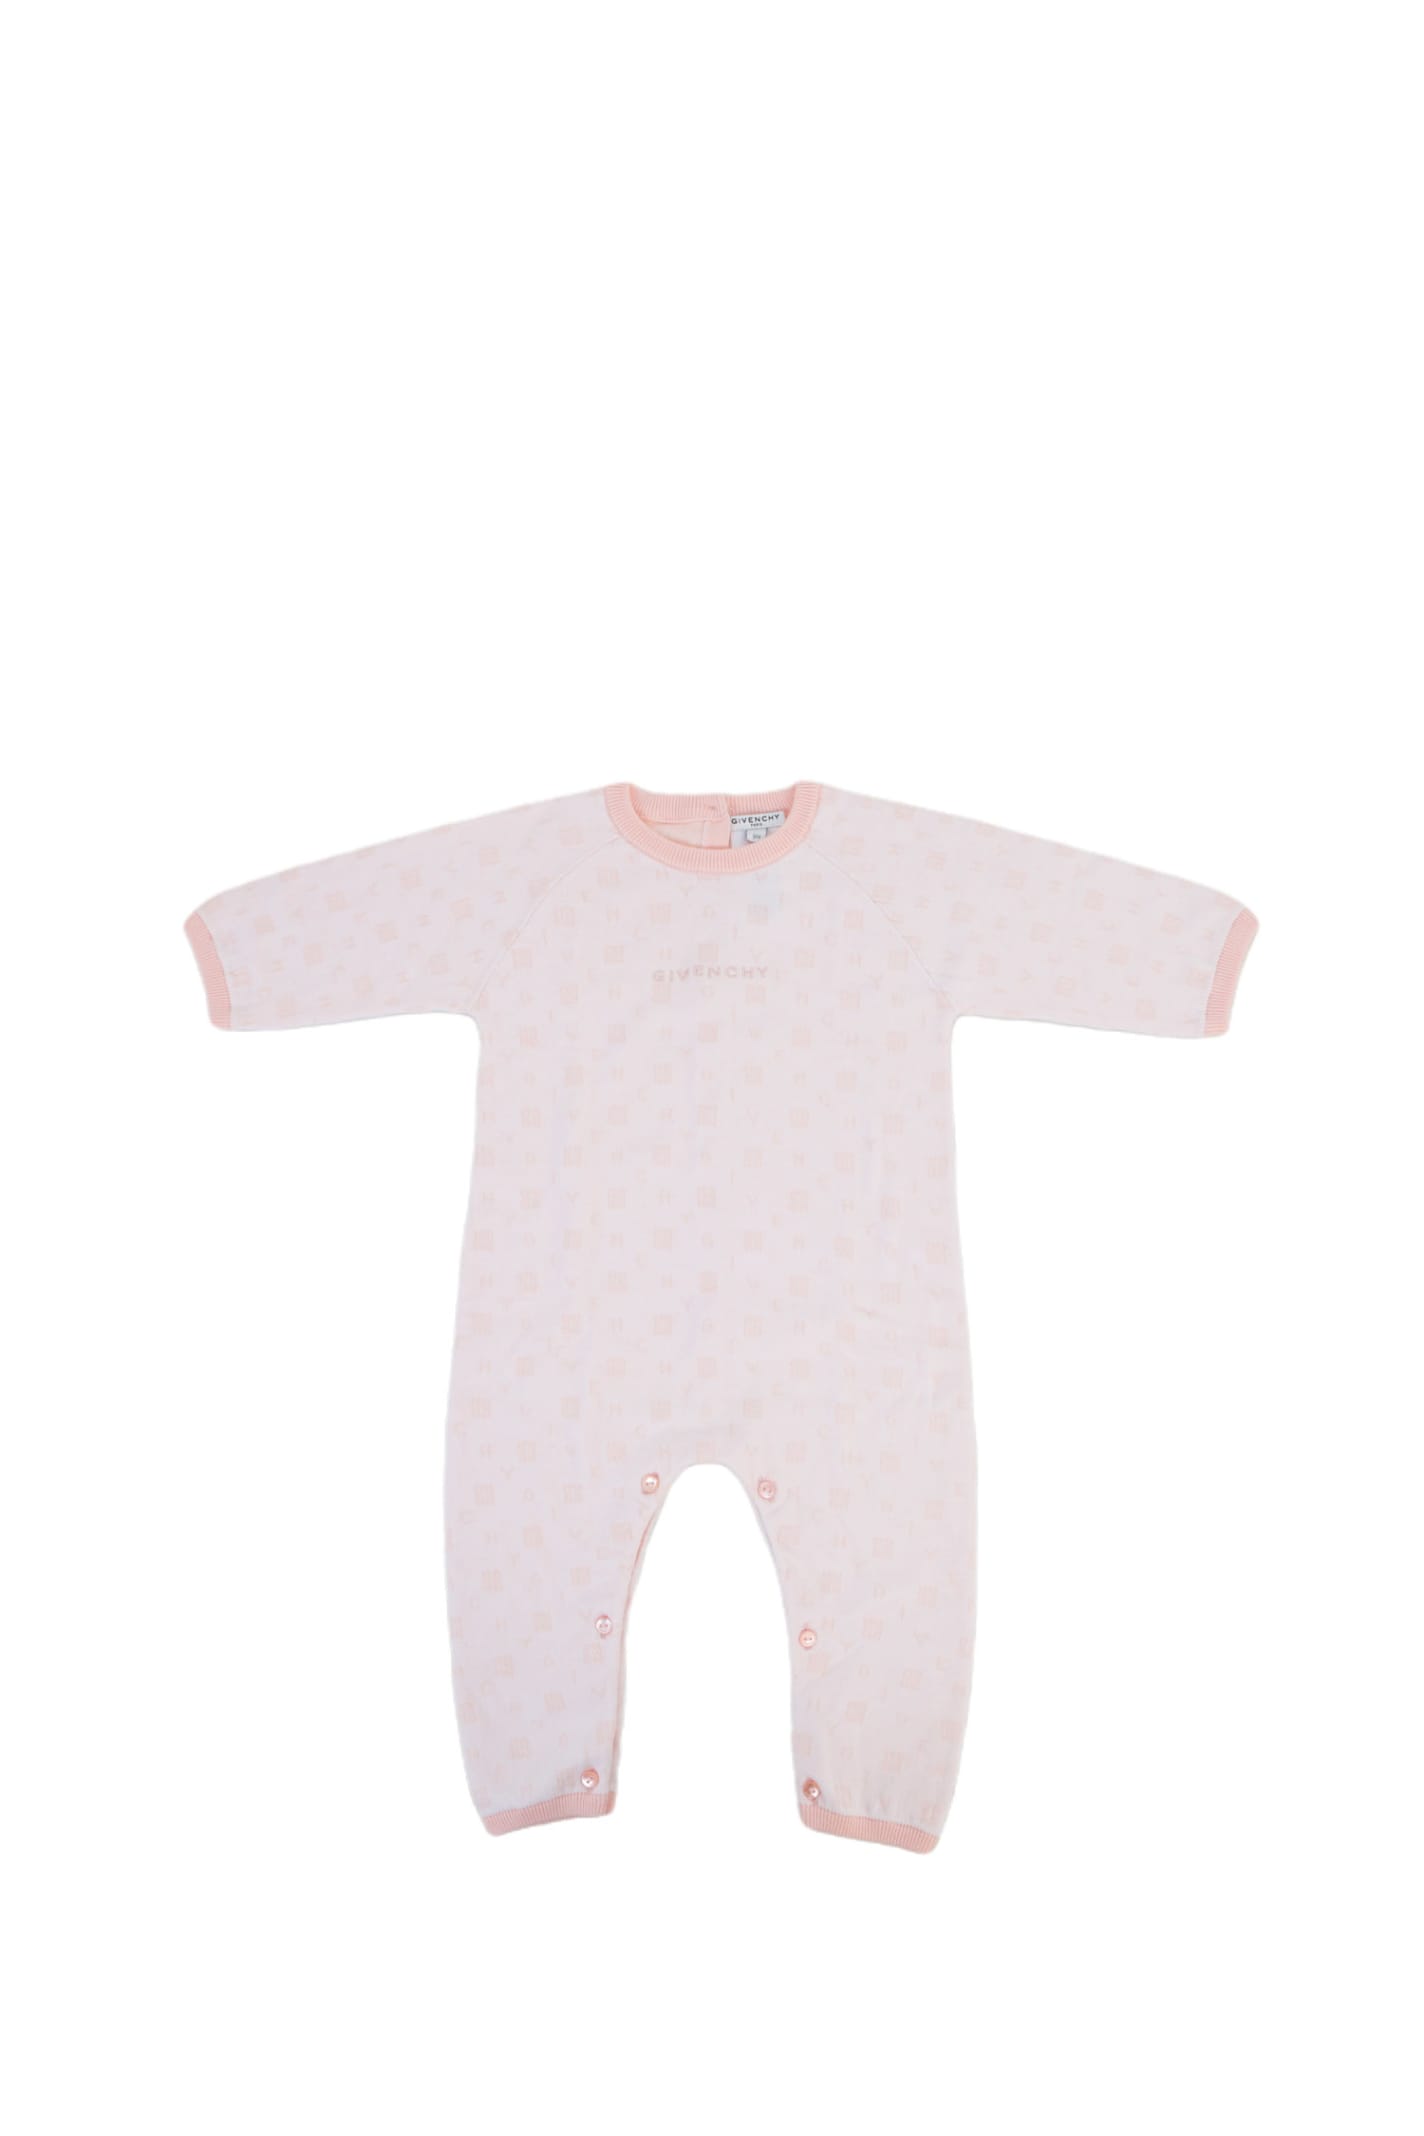 Givenchy Kids' Cotton Romper In Rose